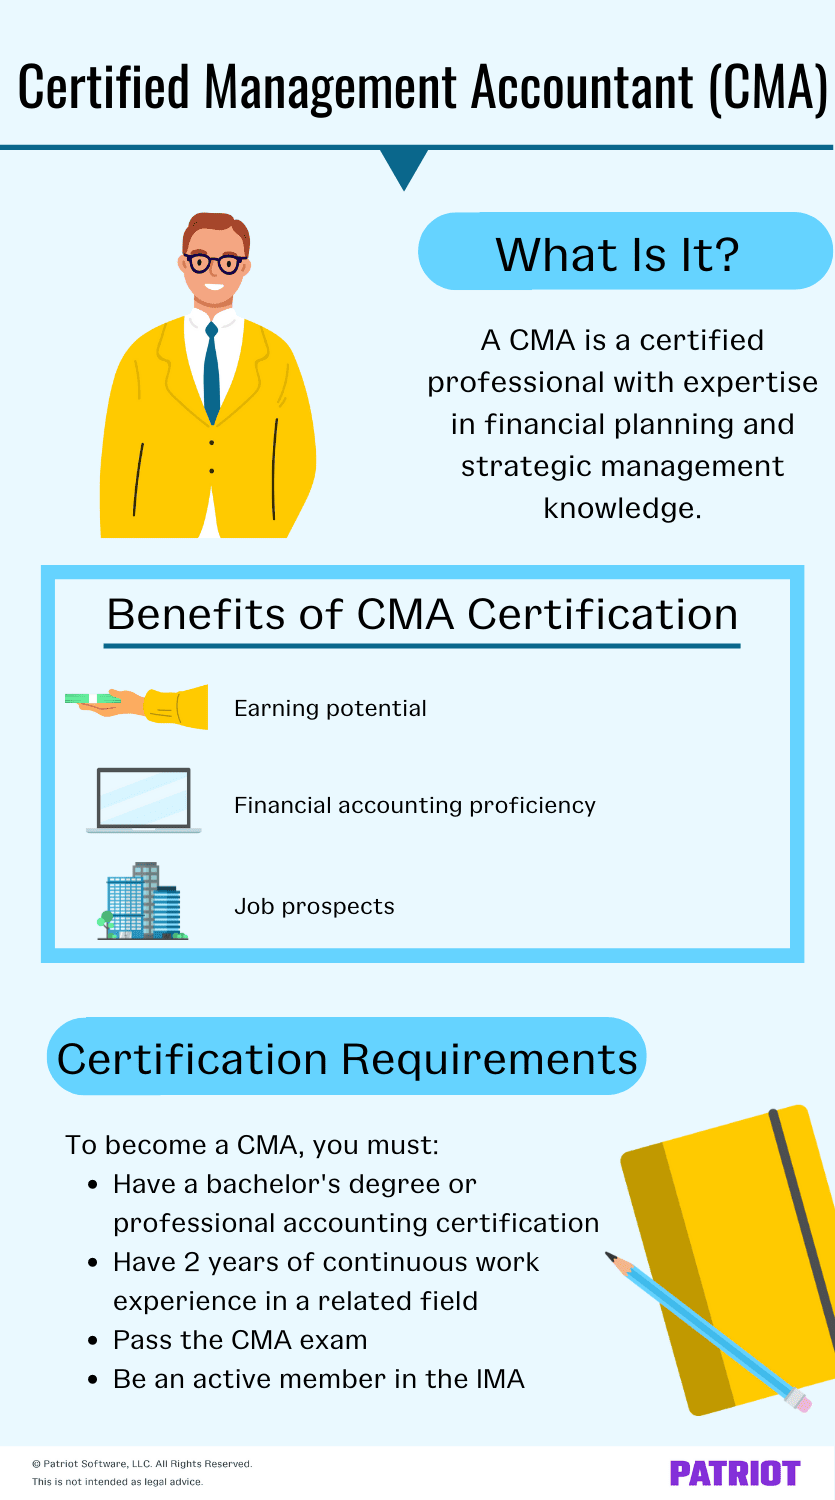 Certified management accountant (CMA): what is it, benefits of certification, and certification requirements